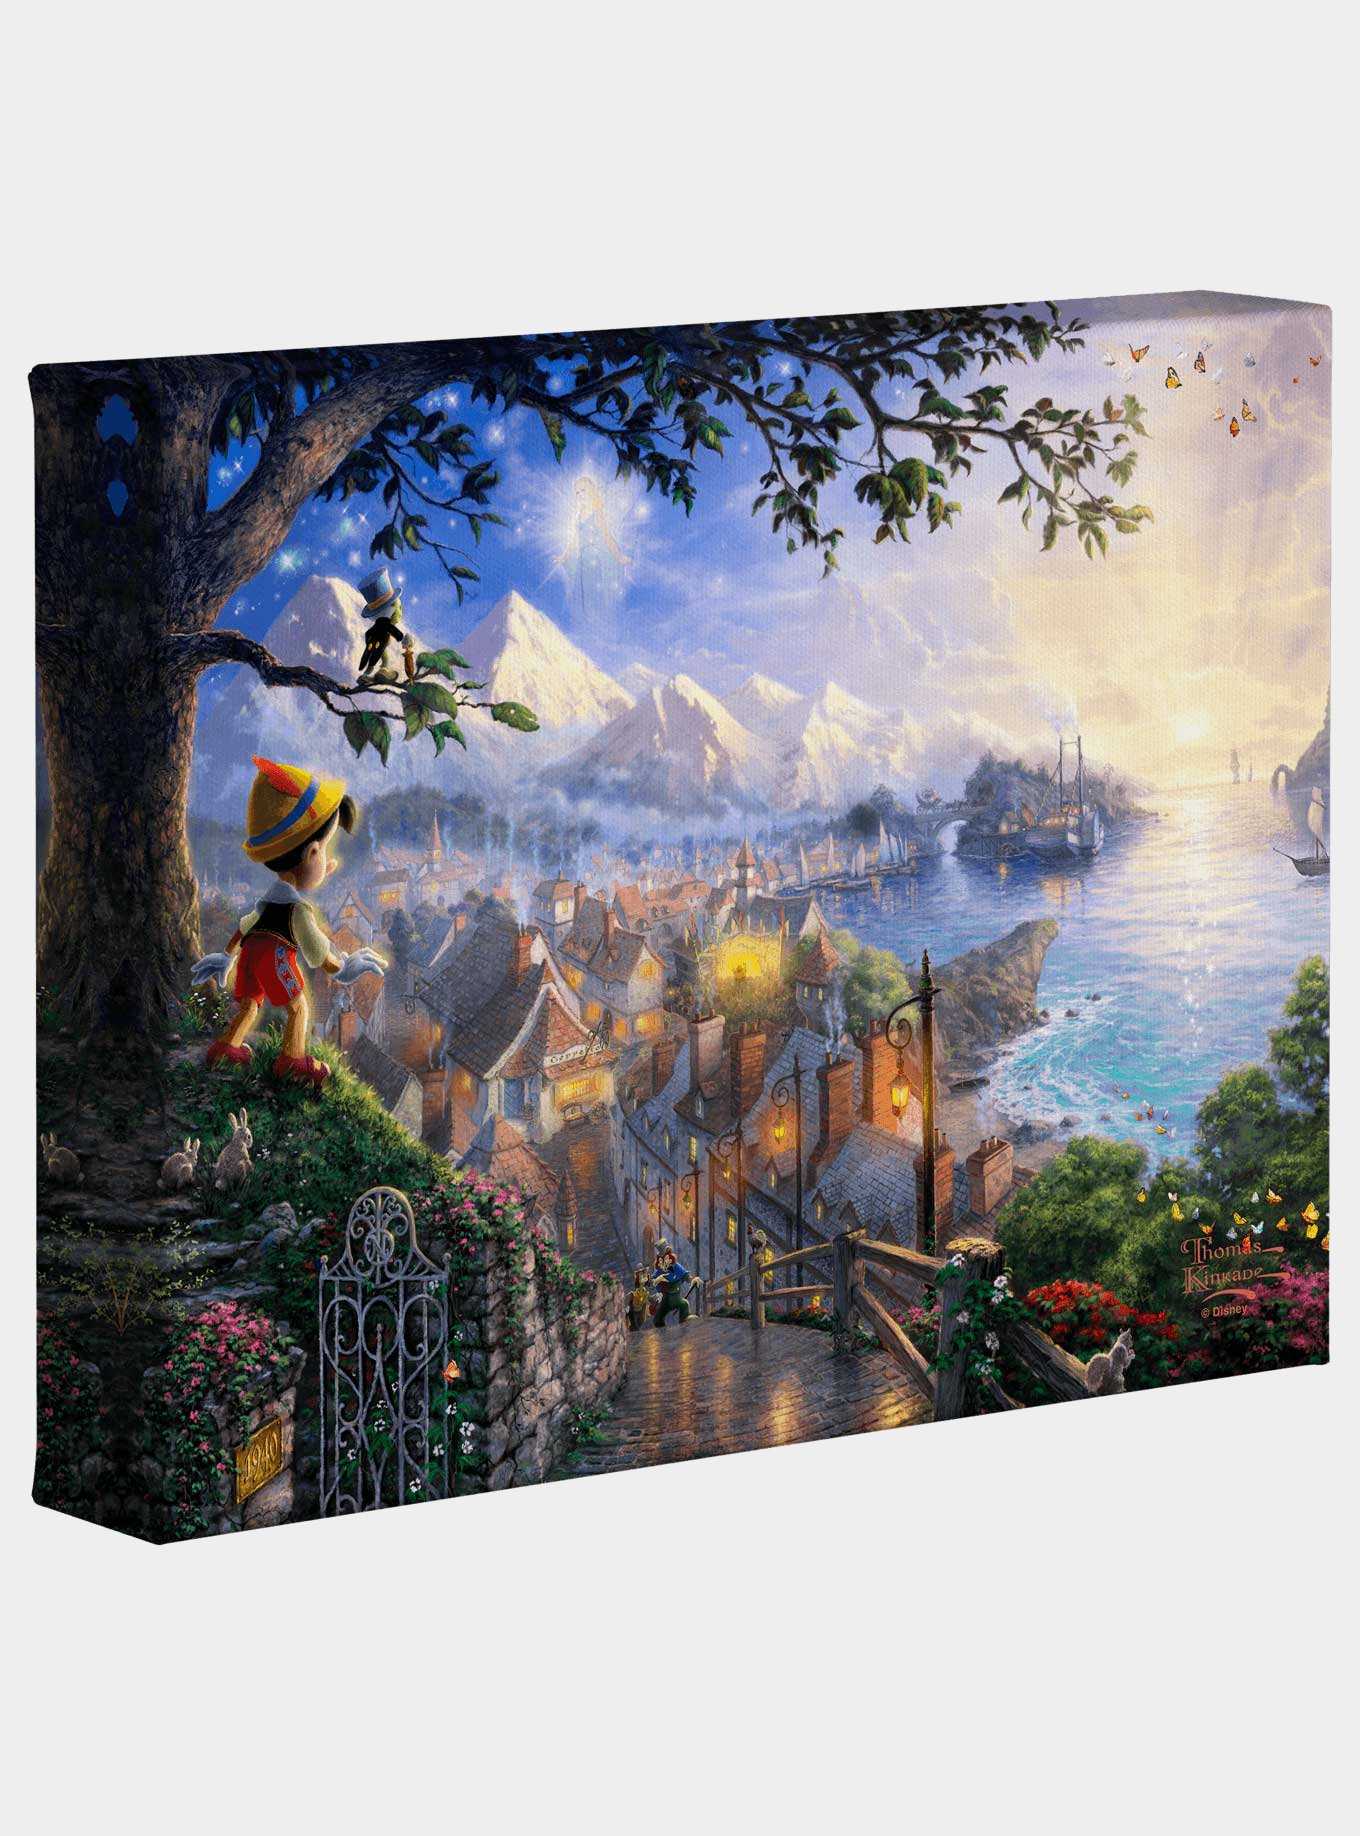 Disney Pinocchio Wishes Upon A Star Gallery Wrapped Canvas, , hi-res